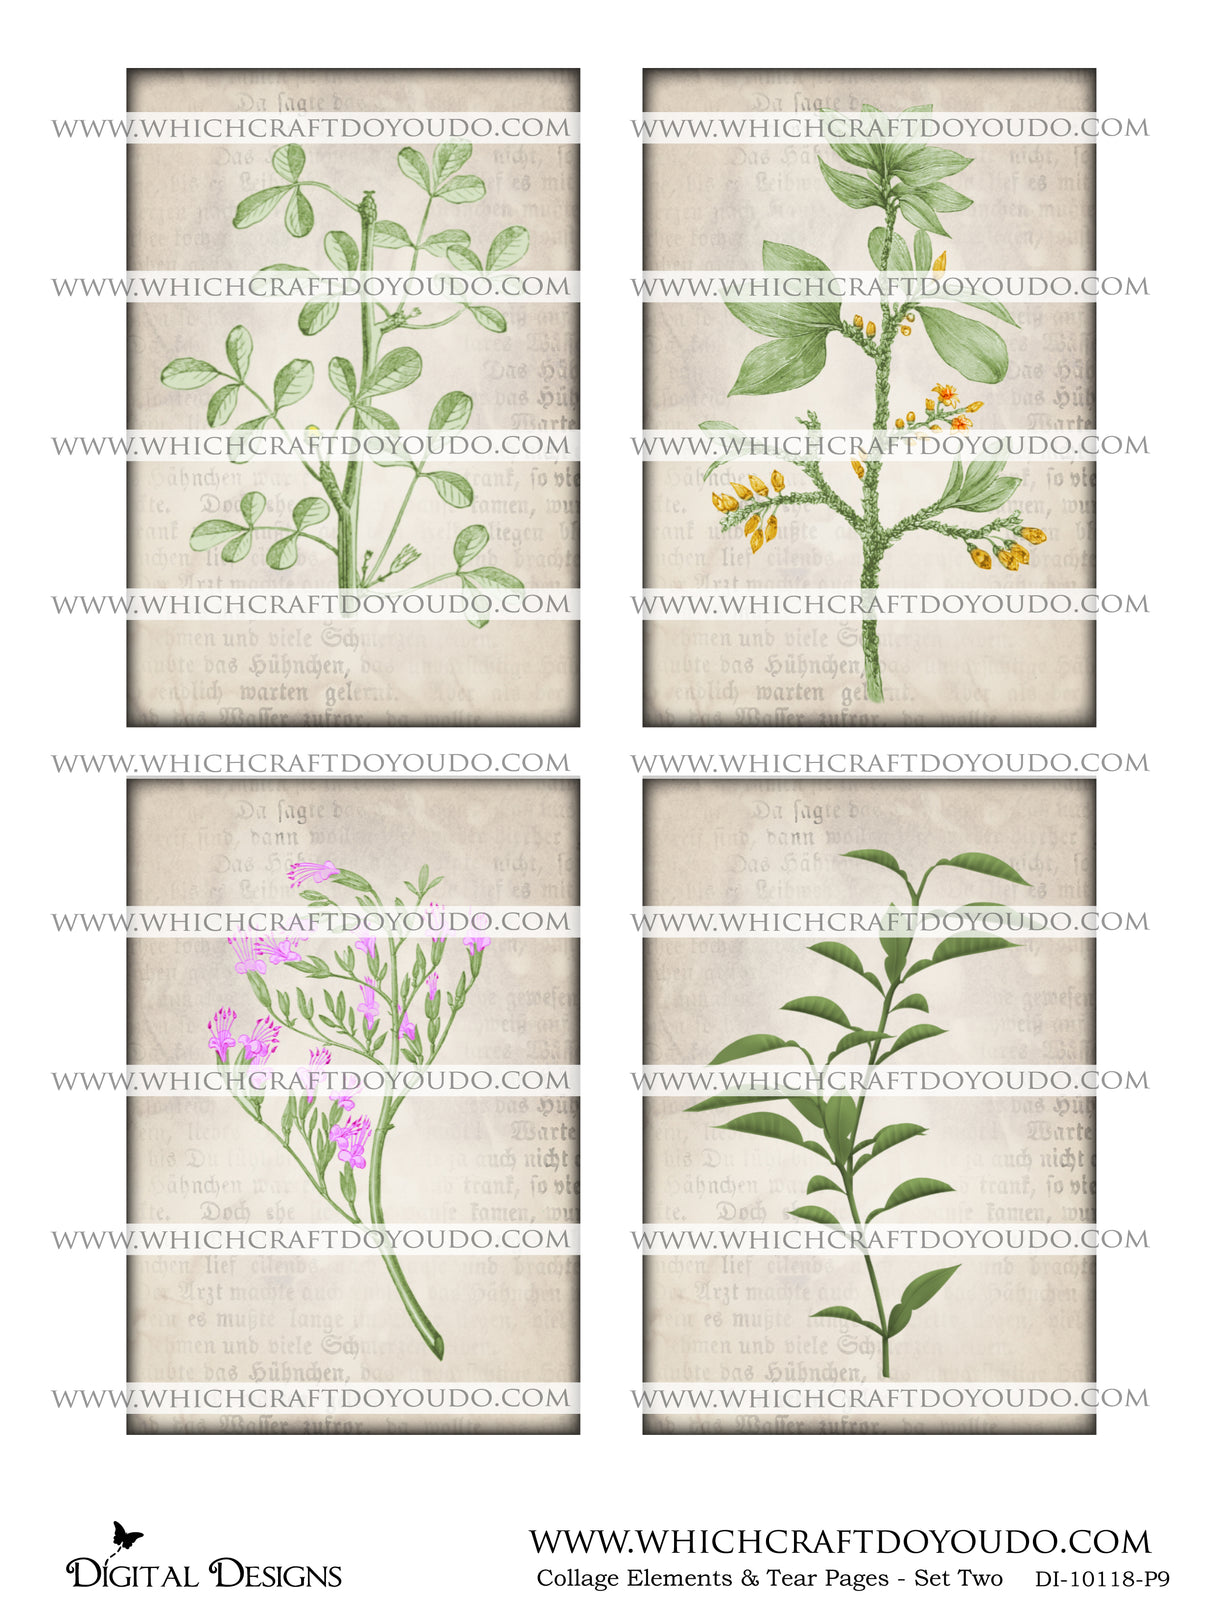 Collage Elements & Tear Pages - Set Two - DI-10118 - Digital Download